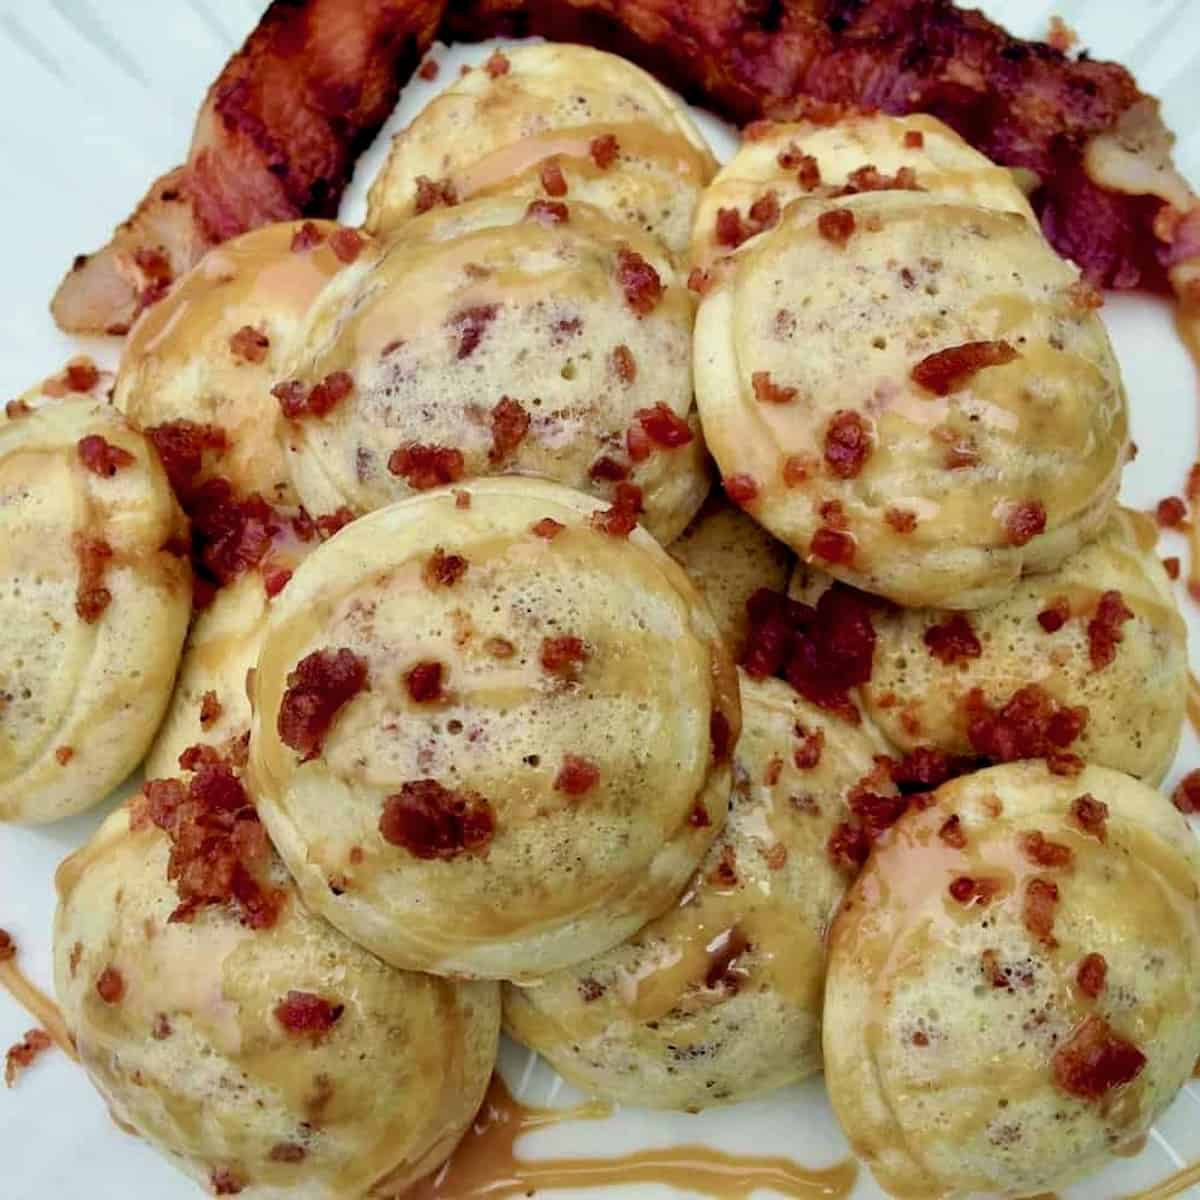 Puffy pancakes Salted Caramel-Bacon Ebelskivers.